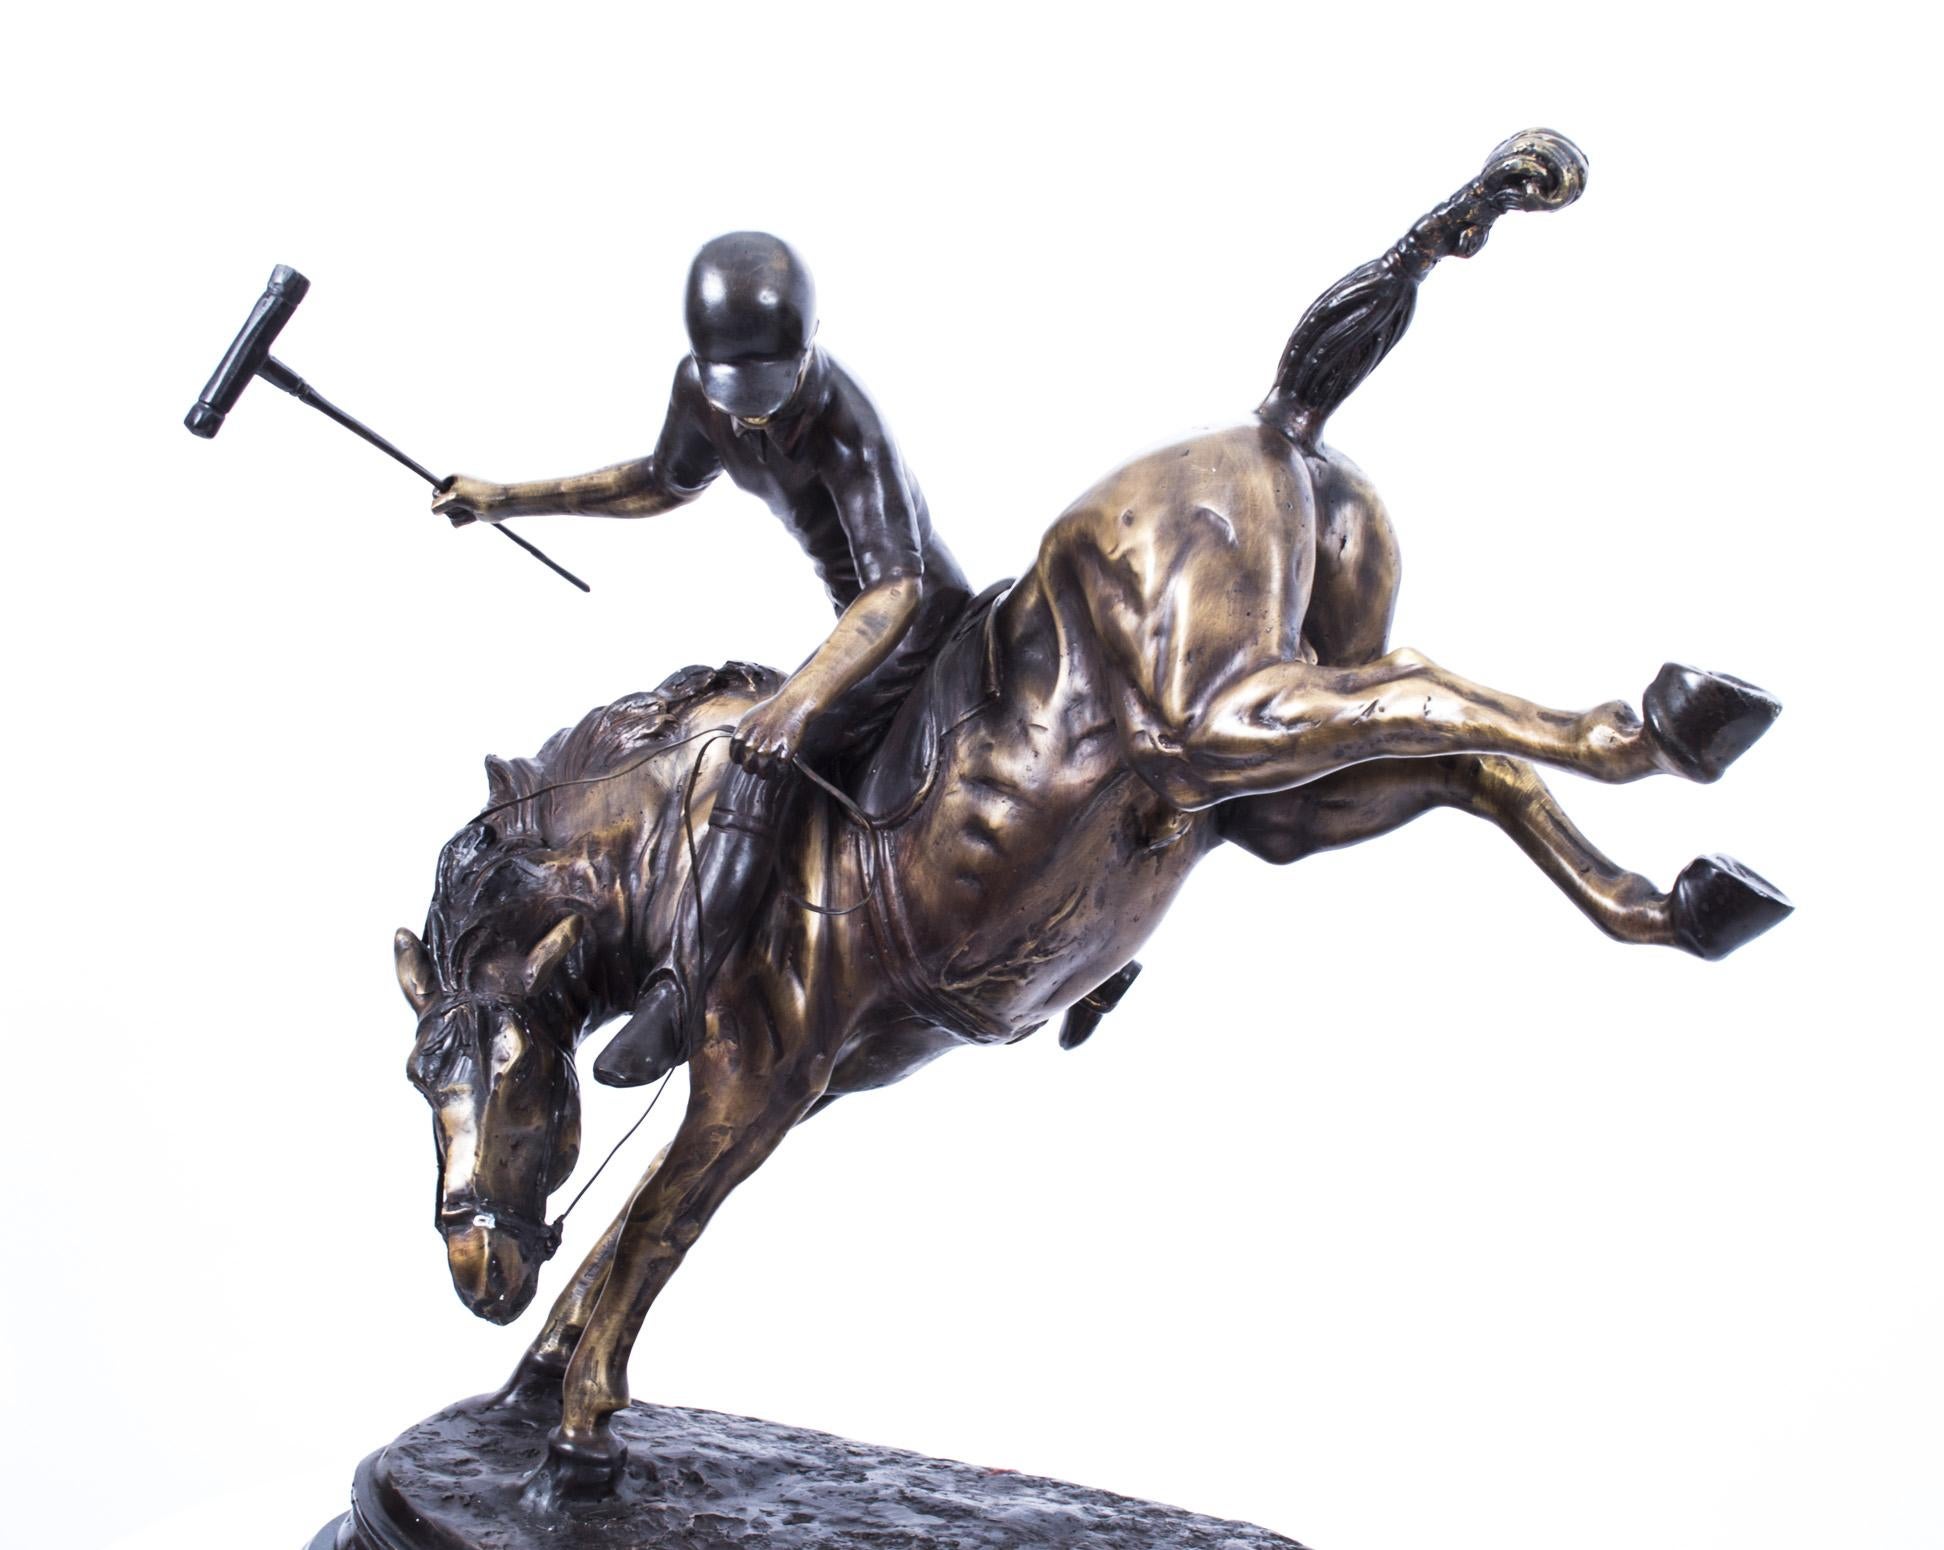 A beautiful bronze sculpture of a polo player in mid-swing on a bucking horse, dating from the last quarter of the 20th century.

The artist amazingly captures this action scene with the horse's hind legs fully kicked in the air.

The attention